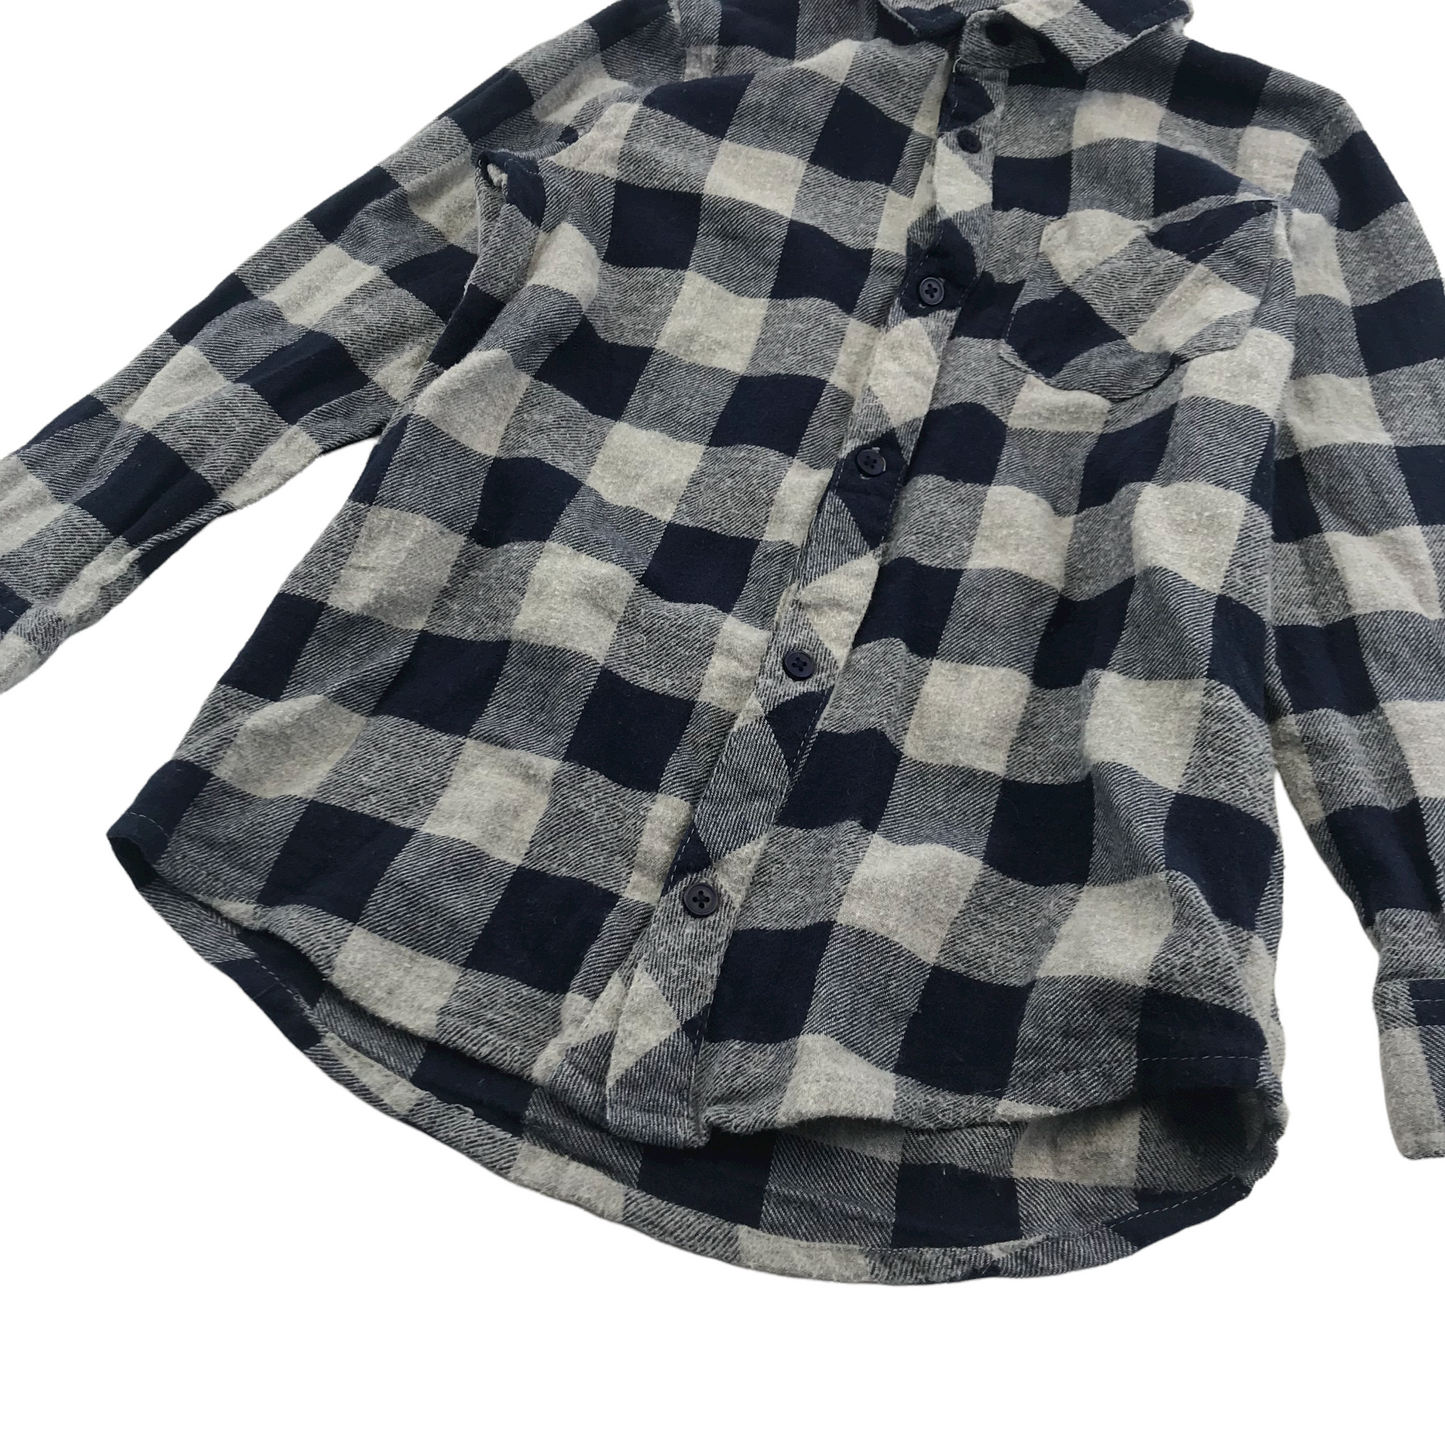 Pep & Co Grey and Blue Checked Shirt Age 6